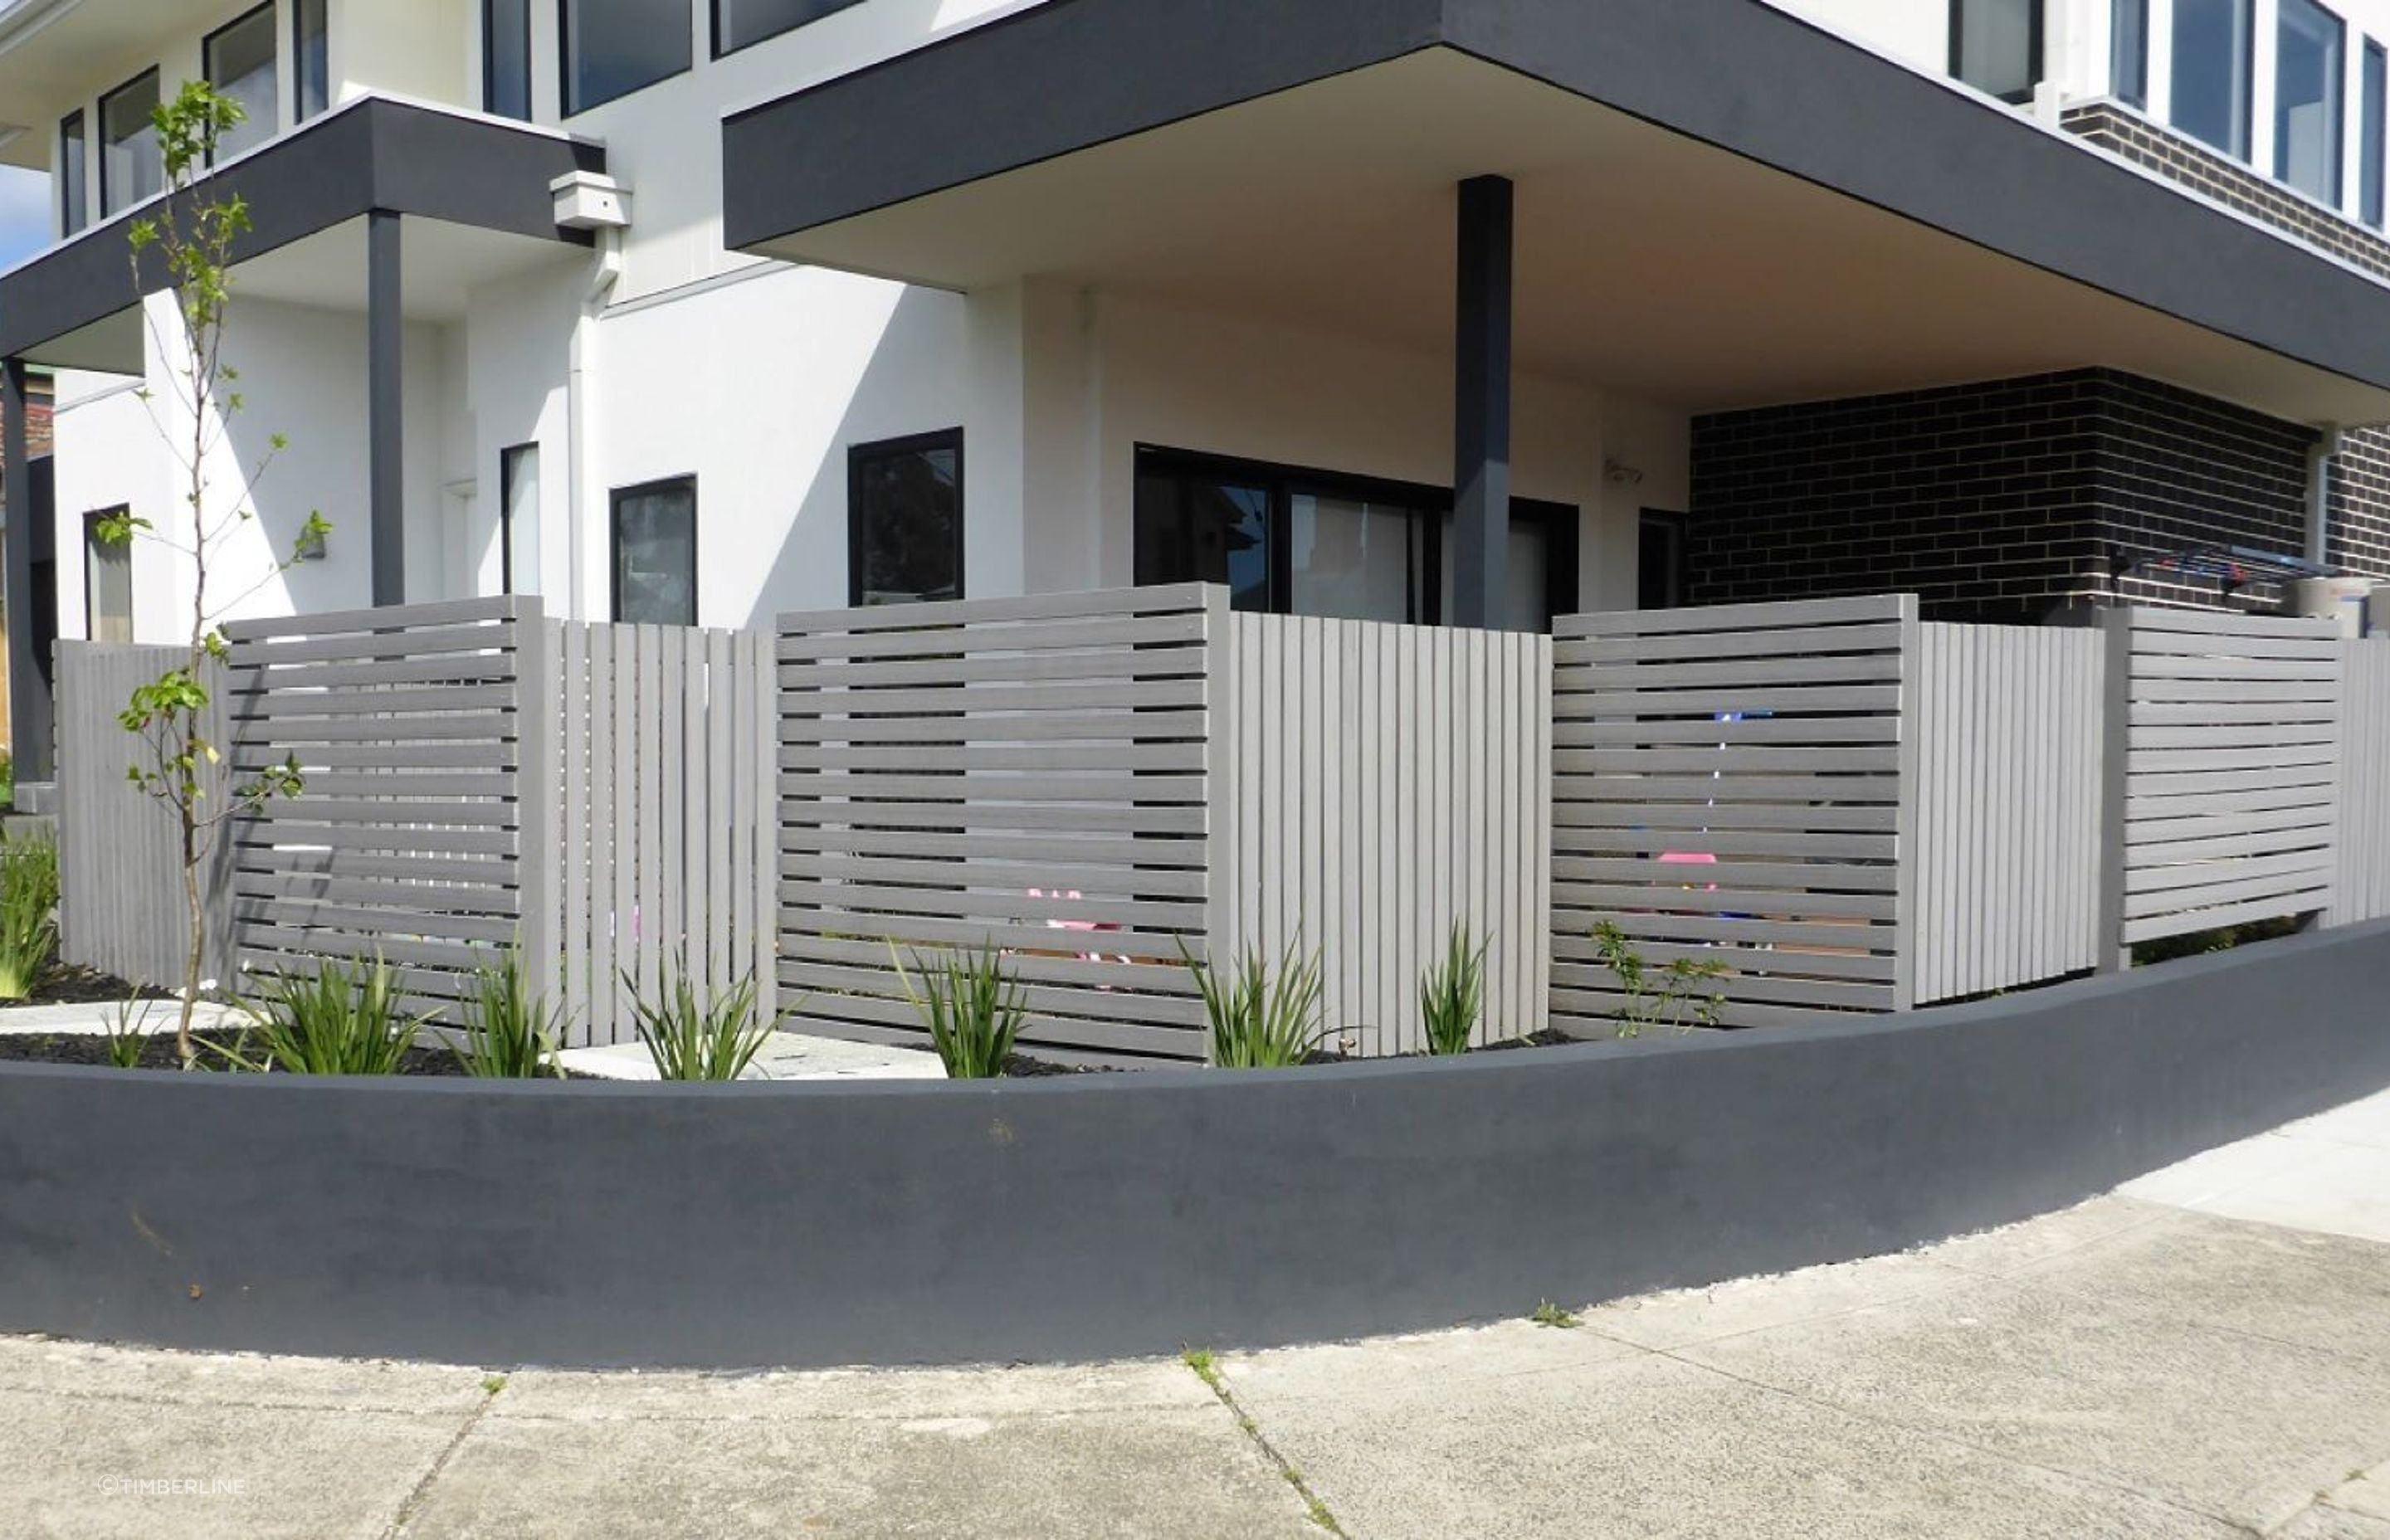 Options like the ModWood Silver Gum Composite Screening show just how authentic the look of composite fencing can be.